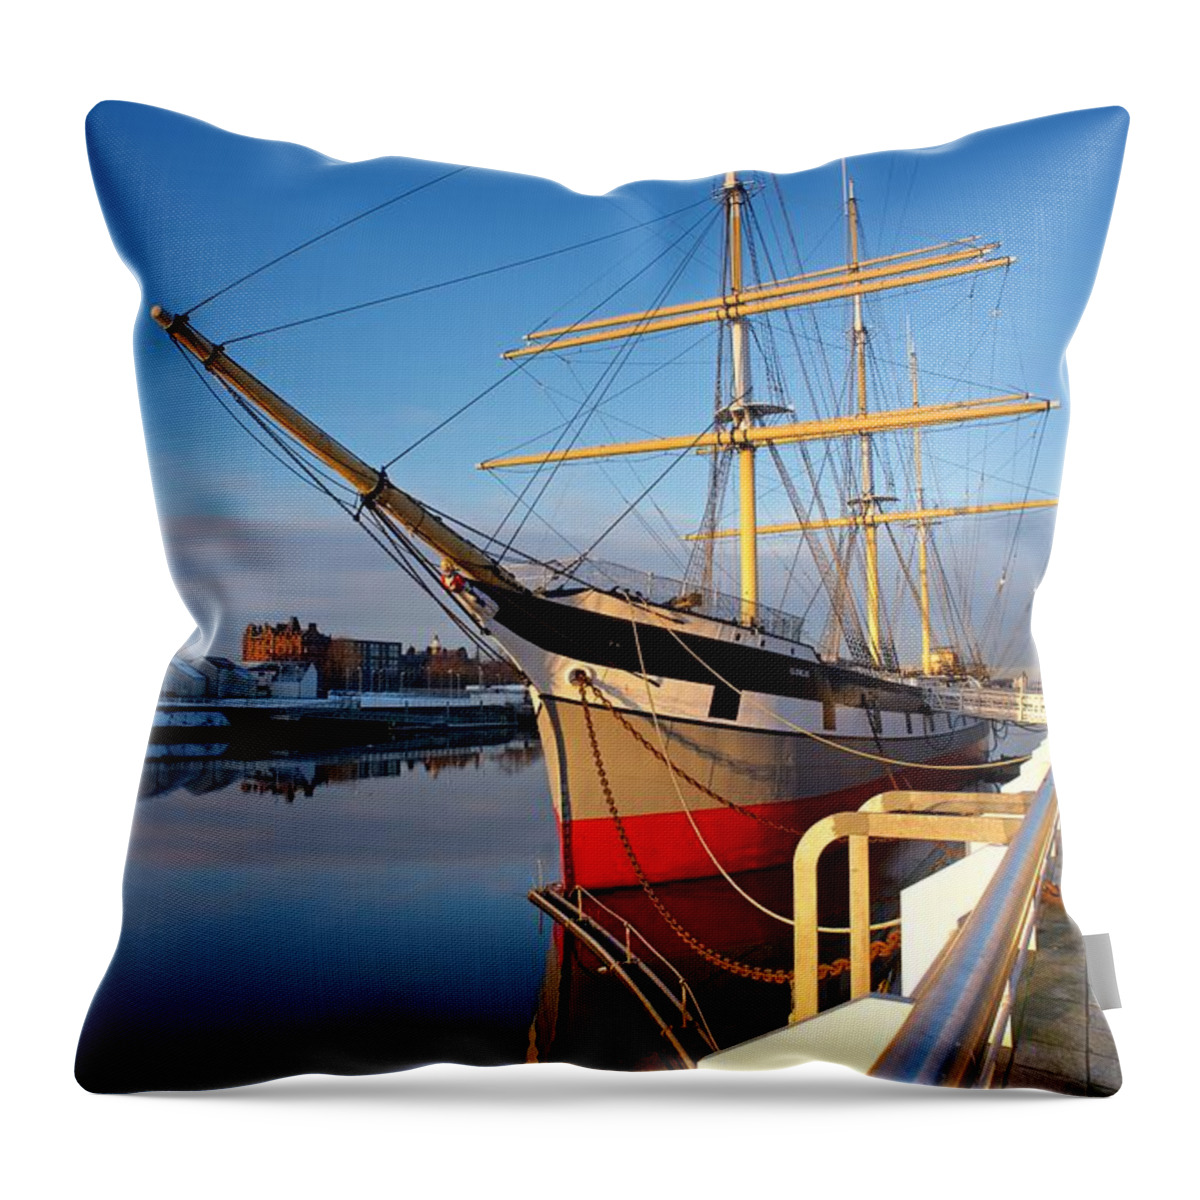 Glasgow Riverside Museum Throw Pillow featuring the photograph The Tall Ship Glasgow #1 by Stephen Taylor